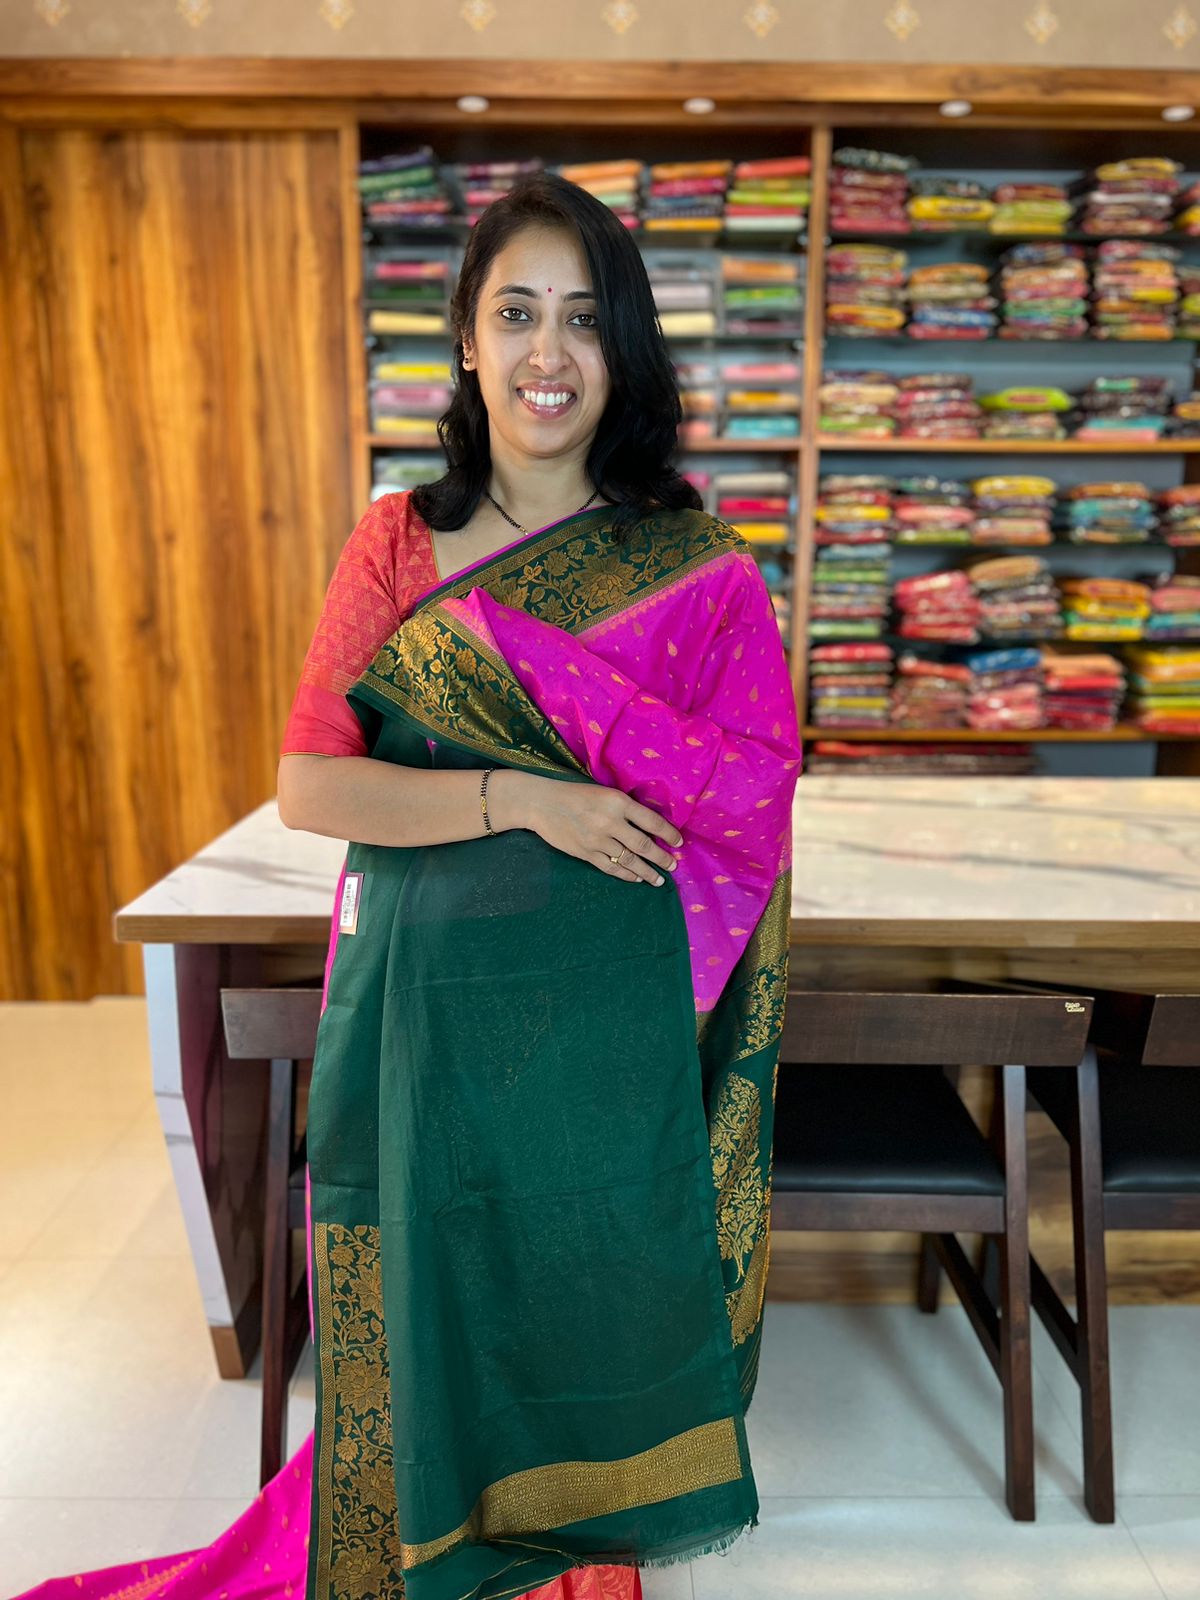 How to Wear Different Color Sarees With Contrast Blouses! | Contrast blouse,  Pink saree, Dark pink saree contrast blouse